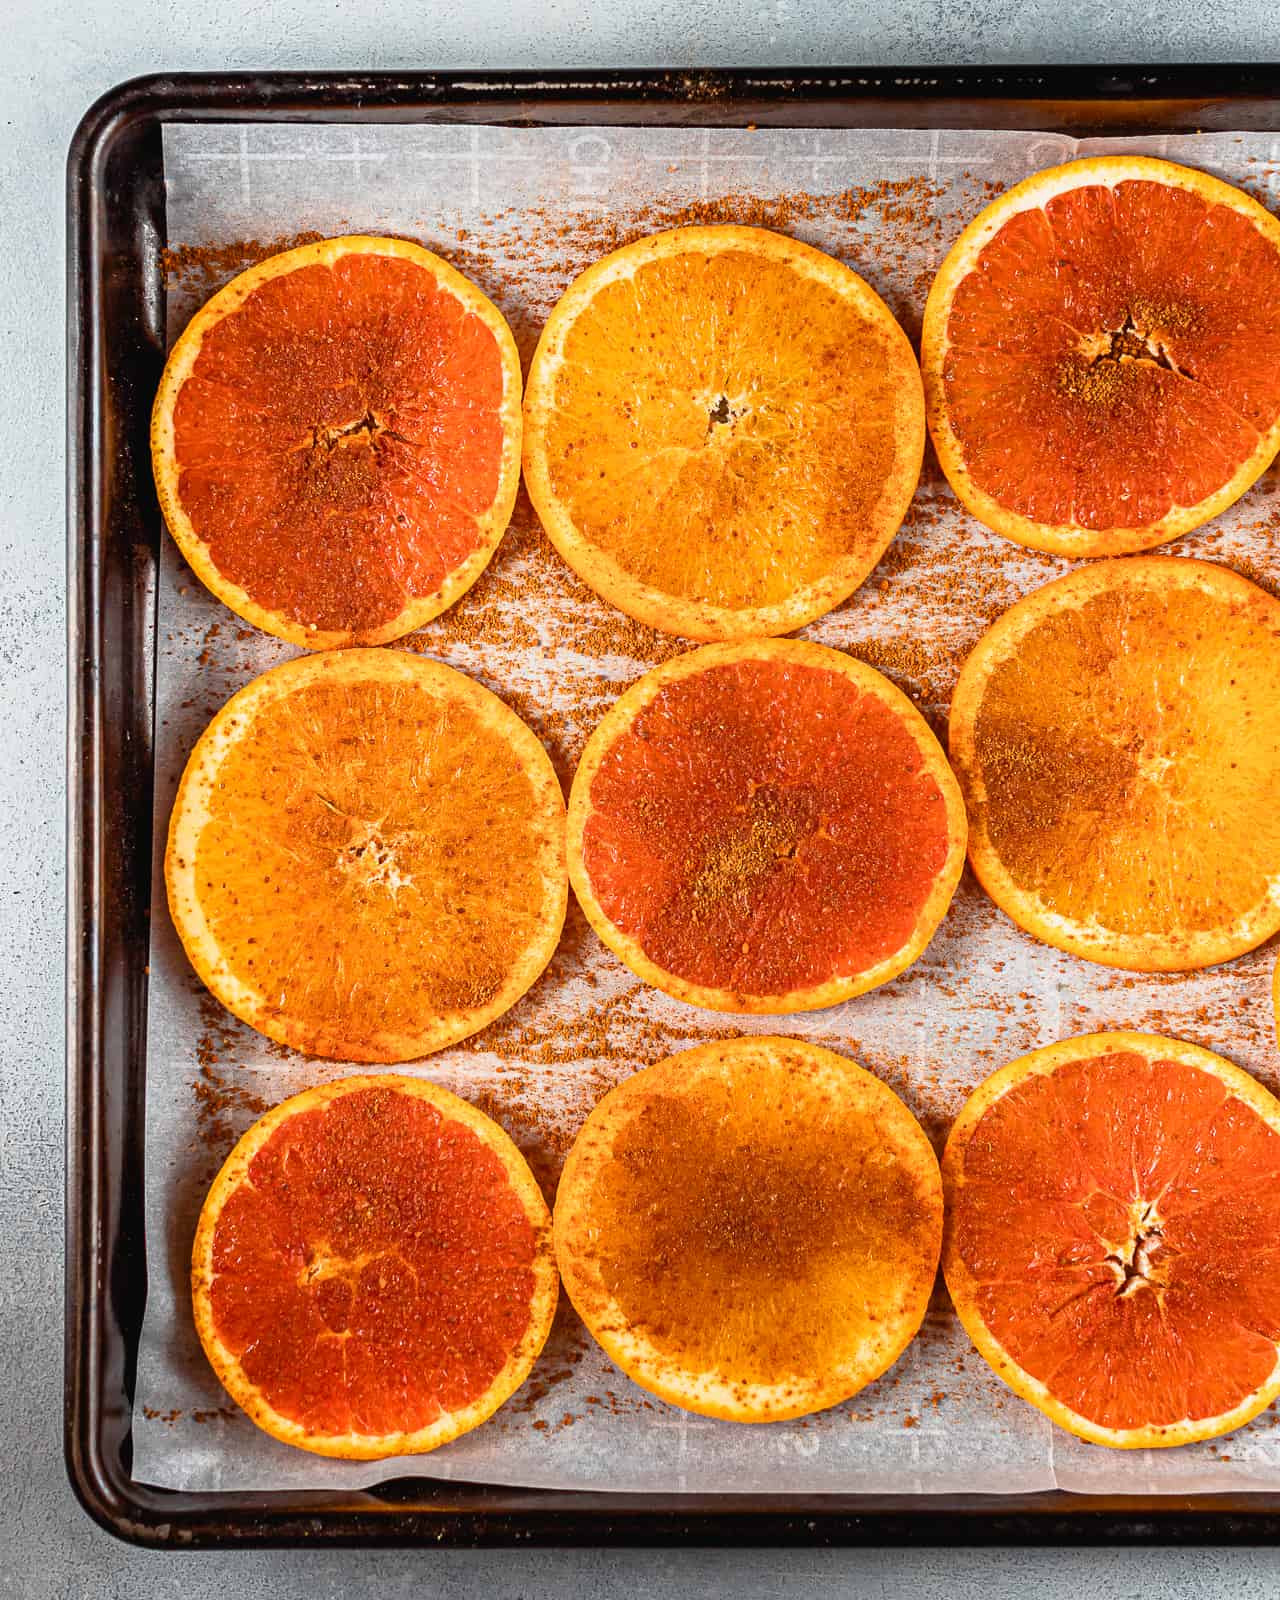 orange slices with spices pre-baking on a baking sheet.